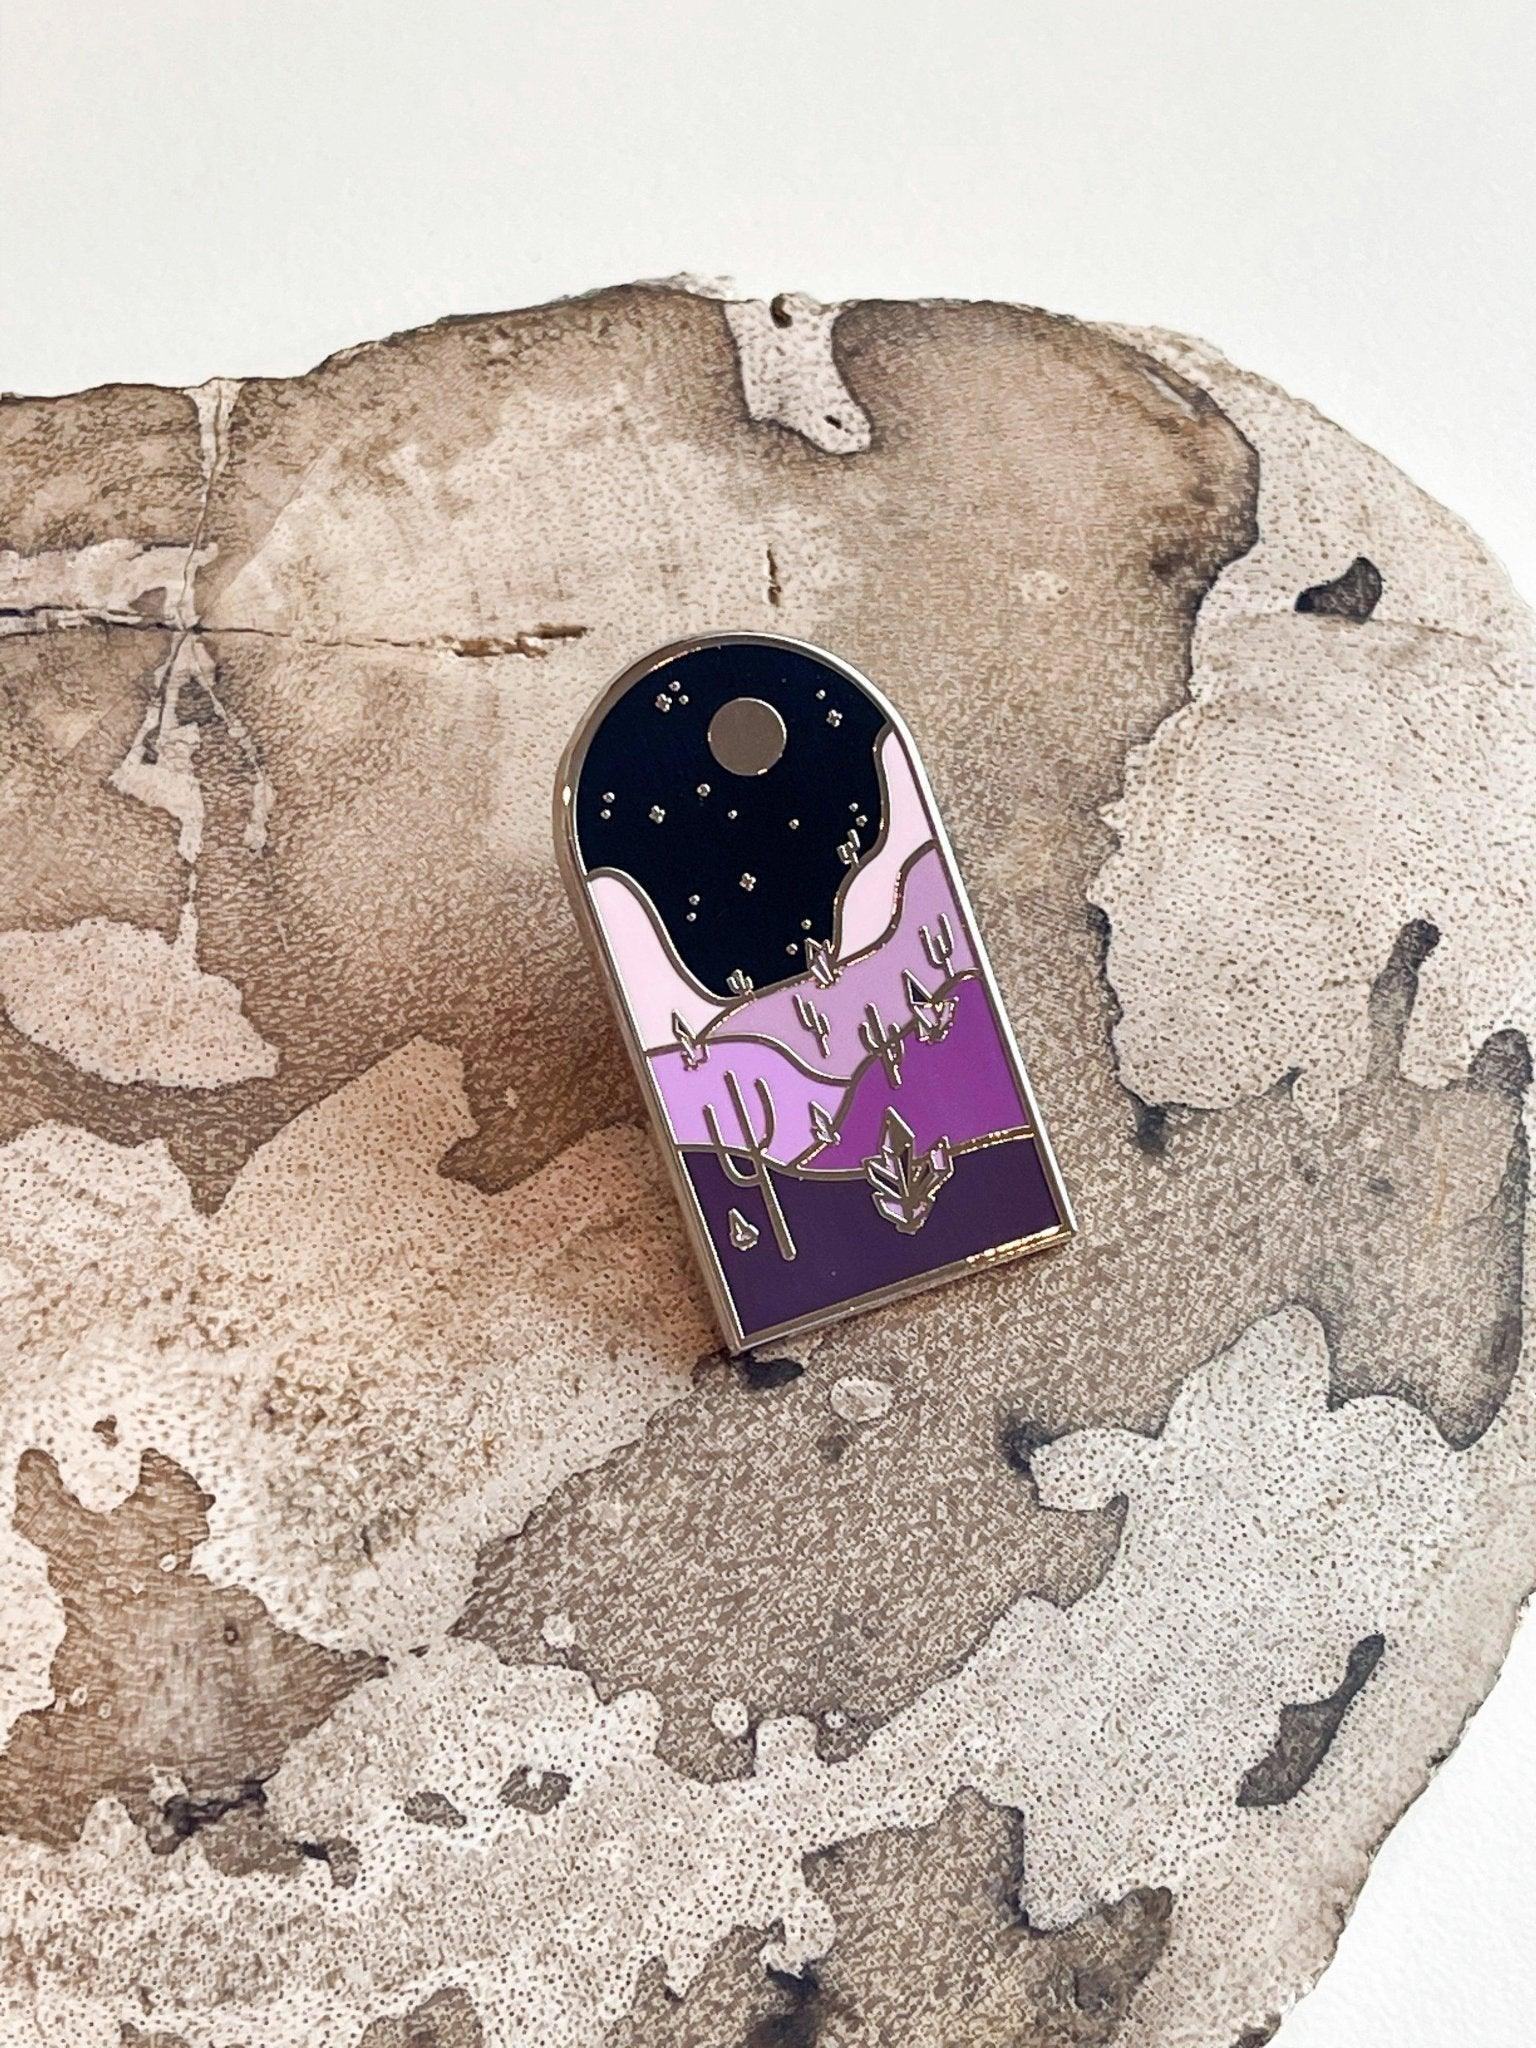 DESERT PORTAL PIN - 33 bday, 444 sale, birthday, desert portal, enamel pin, energy tool, holiday sale, merch, new year sale, pin, spring cleaning sale, sticker, tucson - The Mineral Maven